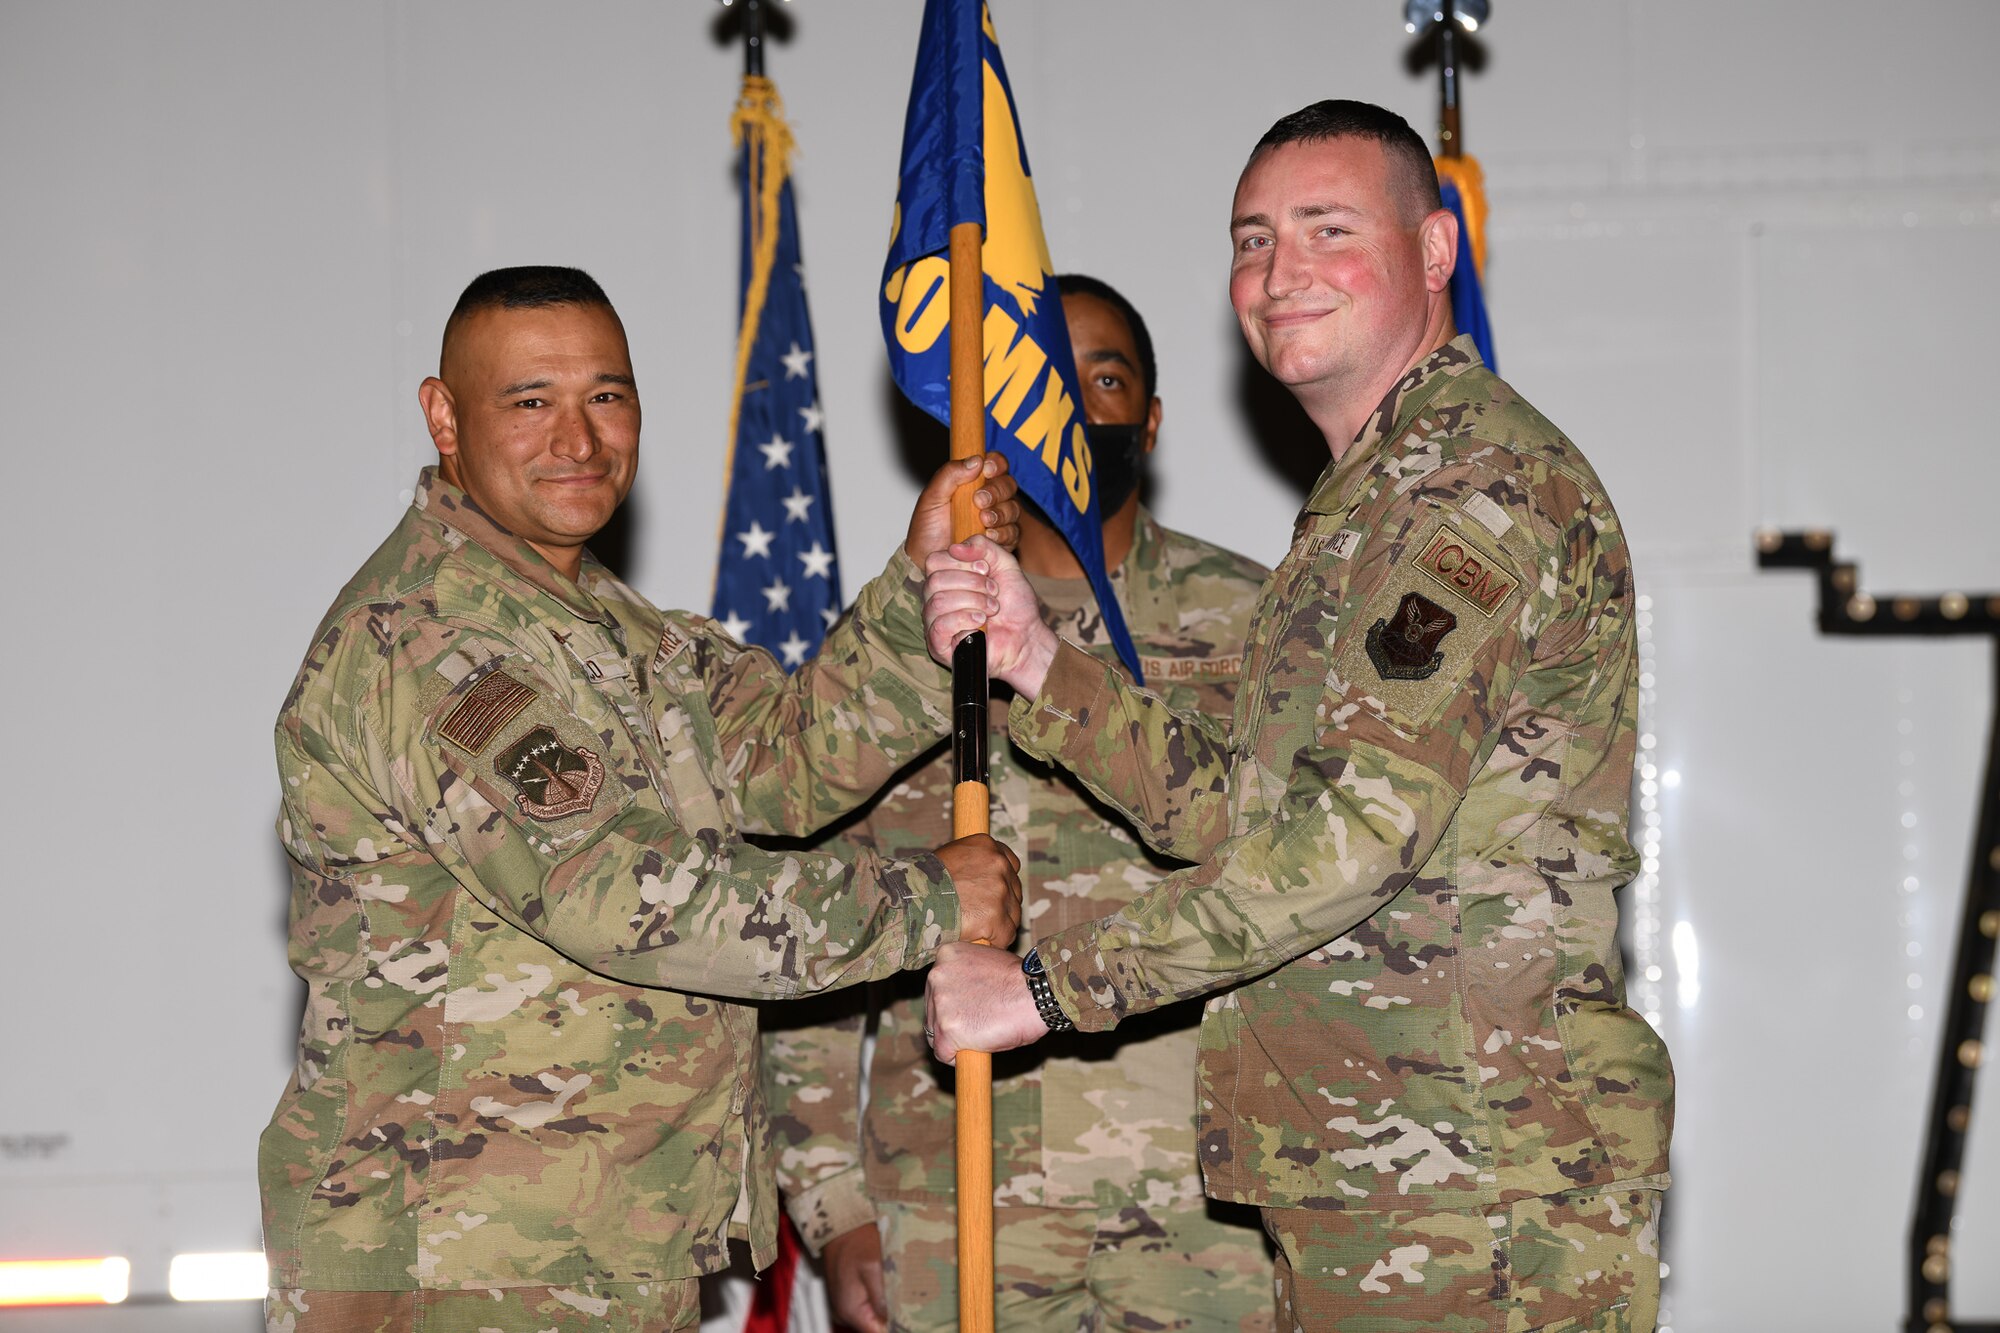 Col. Brian Rico, 90th Maintenance Group commander, passes the guidon to Maj. Henry Hughes, 790th Maintenance Squadron incoming commander, during the 790 MXS change of command ceremony June 1, 2021, in the Maintenance High Bay on F.E. Warren Air Force Base, Wyoming. The ceremony signified the transition of command from Maj. Aaron Taylor to Hughes. (U.S. Air Force photo by Airman 1st Class Charles Munoz)